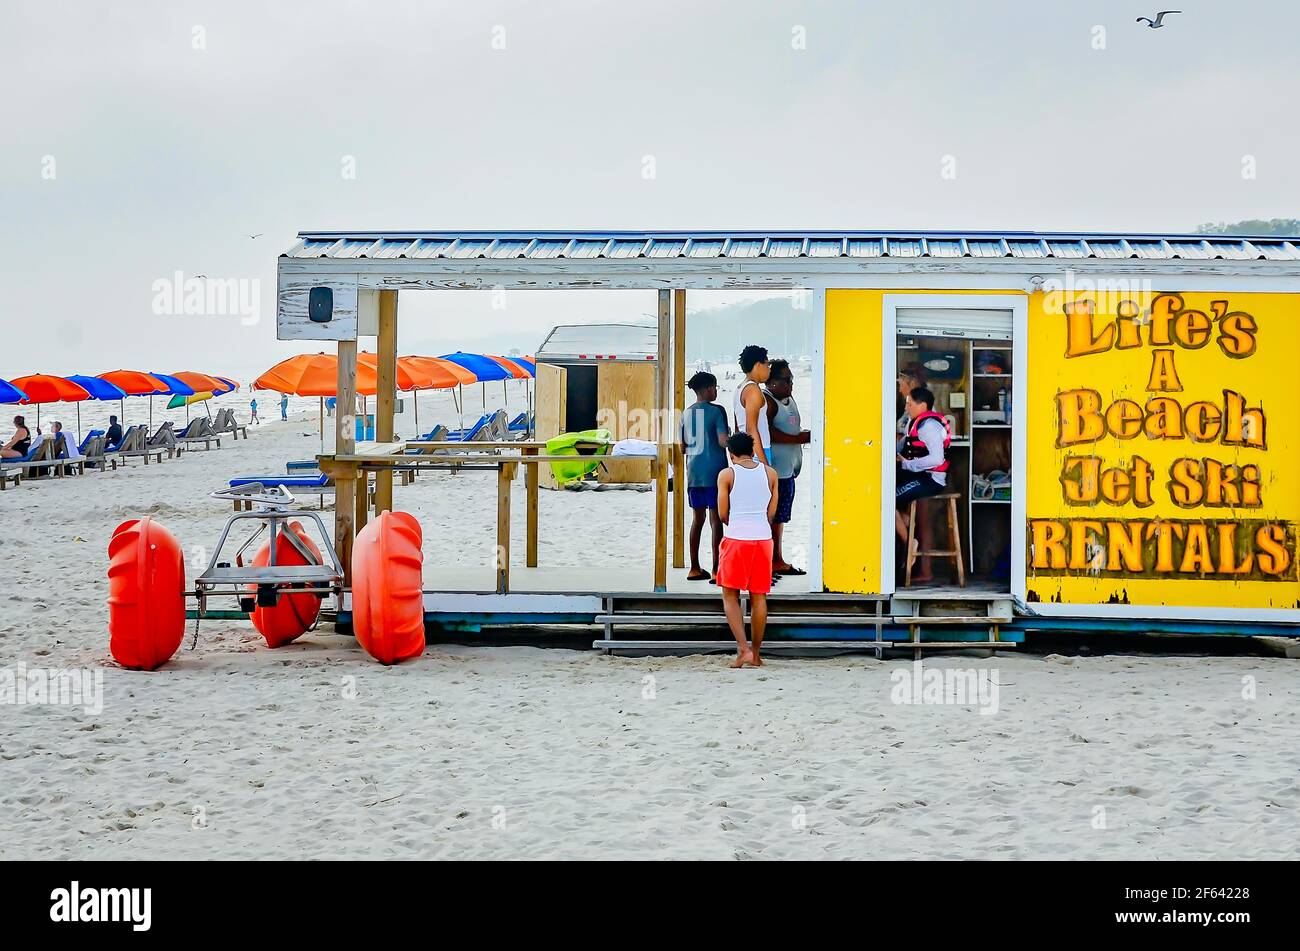 Tourists stand in line to rent jet skis at Life’s a Beach jet ski rentals on Biloxi Beach, March 27, 2021, in Biloxi, Mississippi. Stock Photo